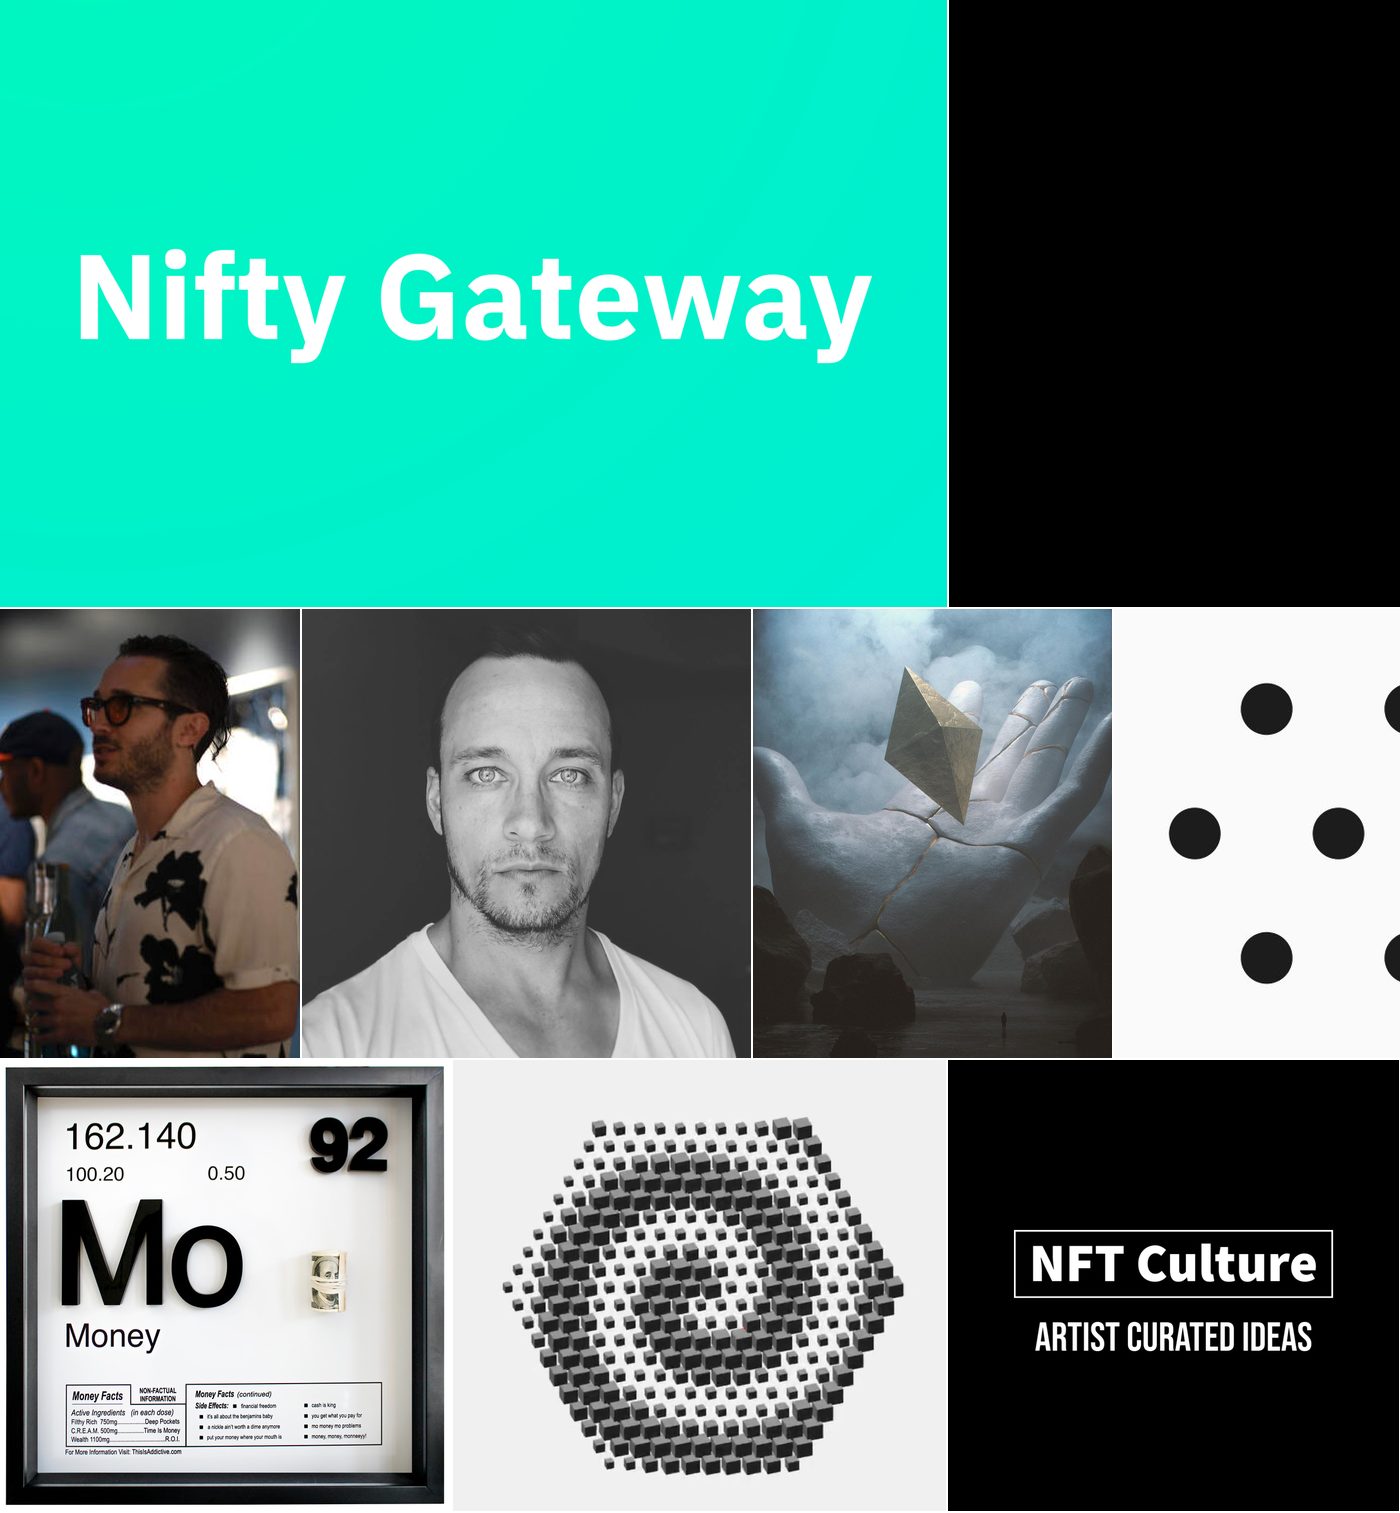 NiftyGateway Drops for the Week